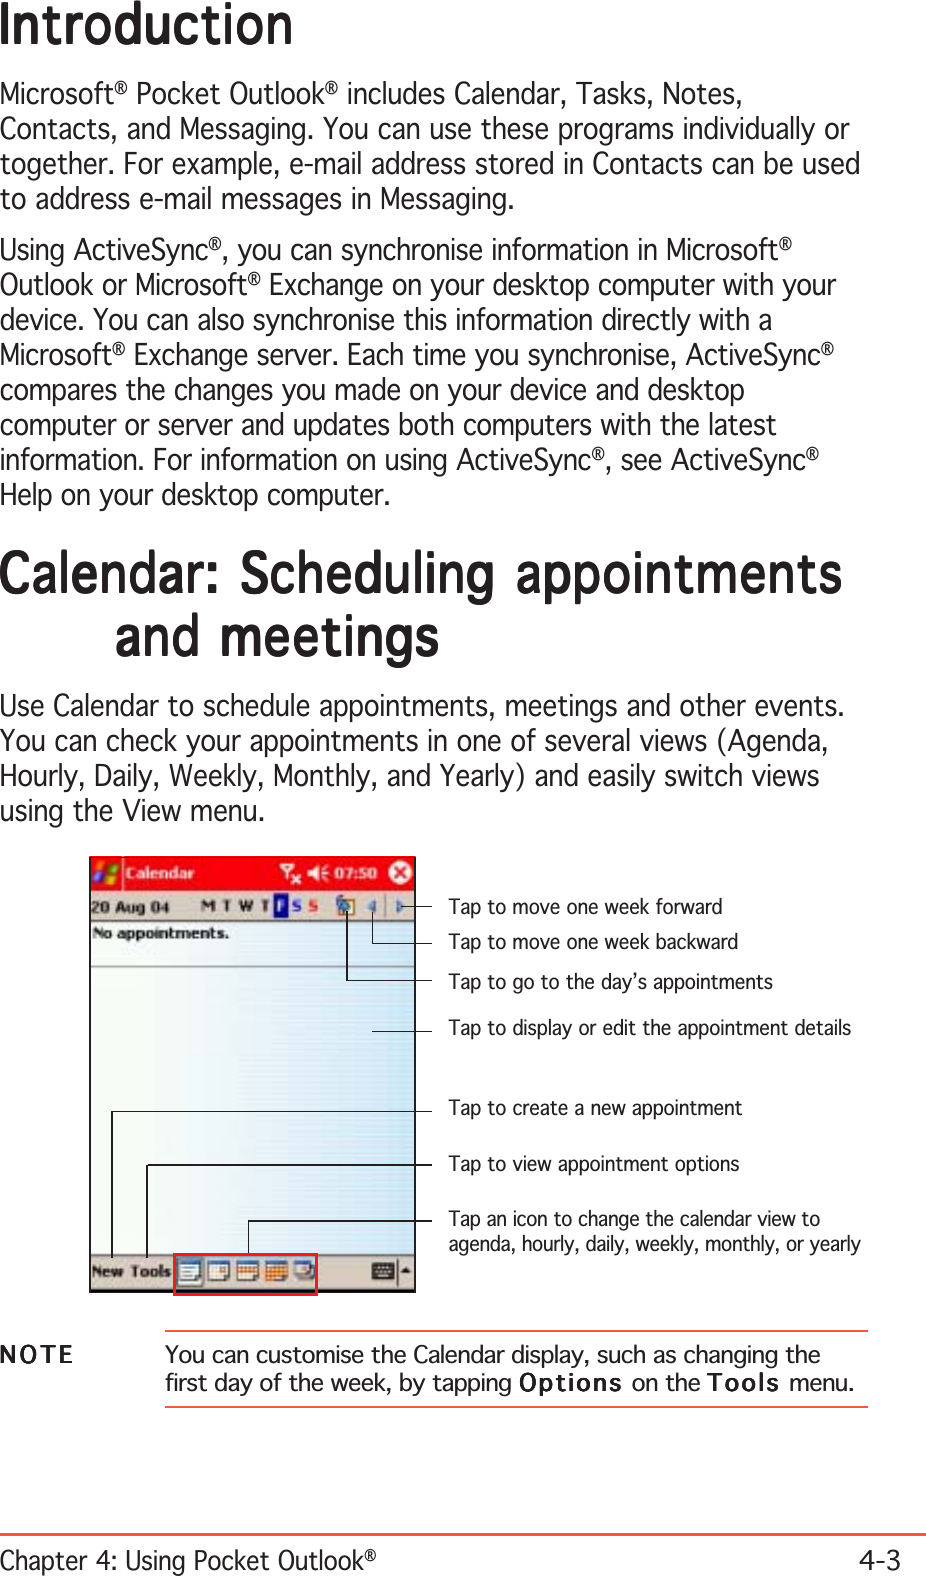 Chapter 4: Using Pocket Outlook®4-3IntroductionIntroductionIntroductionIntroductionIntroductionMicrosoft® Pocket Outlook® includes Calendar, Tasks, Notes,Contacts, and Messaging. You can use these programs individually ortogether. For example, e-mail address stored in Contacts can be usedto address e-mail messages in Messaging.Using ActiveSync®, you can synchronise information in Microsoft®Outlook or Microsoft® Exchange on your desktop computer with yourdevice. You can also synchronise this information directly with aMicrosoft® Exchange server. Each time you synchronise, ActiveSync®compares the changes you made on your device and desktopcomputer or server and updates both computers with the latestinformation. For information on using ActiveSync®, see ActiveSync®Help on your desktop computer.Calendar: Scheduling appointmentsCalendar: Scheduling appointmentsCalendar: Scheduling appointmentsCalendar: Scheduling appointmentsCalendar: Scheduling appointmentsand meetingsand meetingsand meetingsand meetingsand meetingsUse Calendar to schedule appointments, meetings and other events.You can check your appointments in one of several views (Agenda,Hourly, Daily, Weekly, Monthly, and Yearly) and easily switch viewsusing the View menu.NOTENOTENOTENOTEN O T E You can customise the Calendar display, such as changing thefirst day of the week, by tapping OptionsOptionsOptionsOptionsOptions on the ToolsToolsToolsToolsTools menu.Tap to go to the day’s appointmentsTap to display or edit the appointment detailsTap to view appointment optionsTap to move one week forwardTap to move one week backwardTap an icon to change the calendar view toagenda, hourly, daily, weekly, monthly, or yearlyTap to create a new appointment